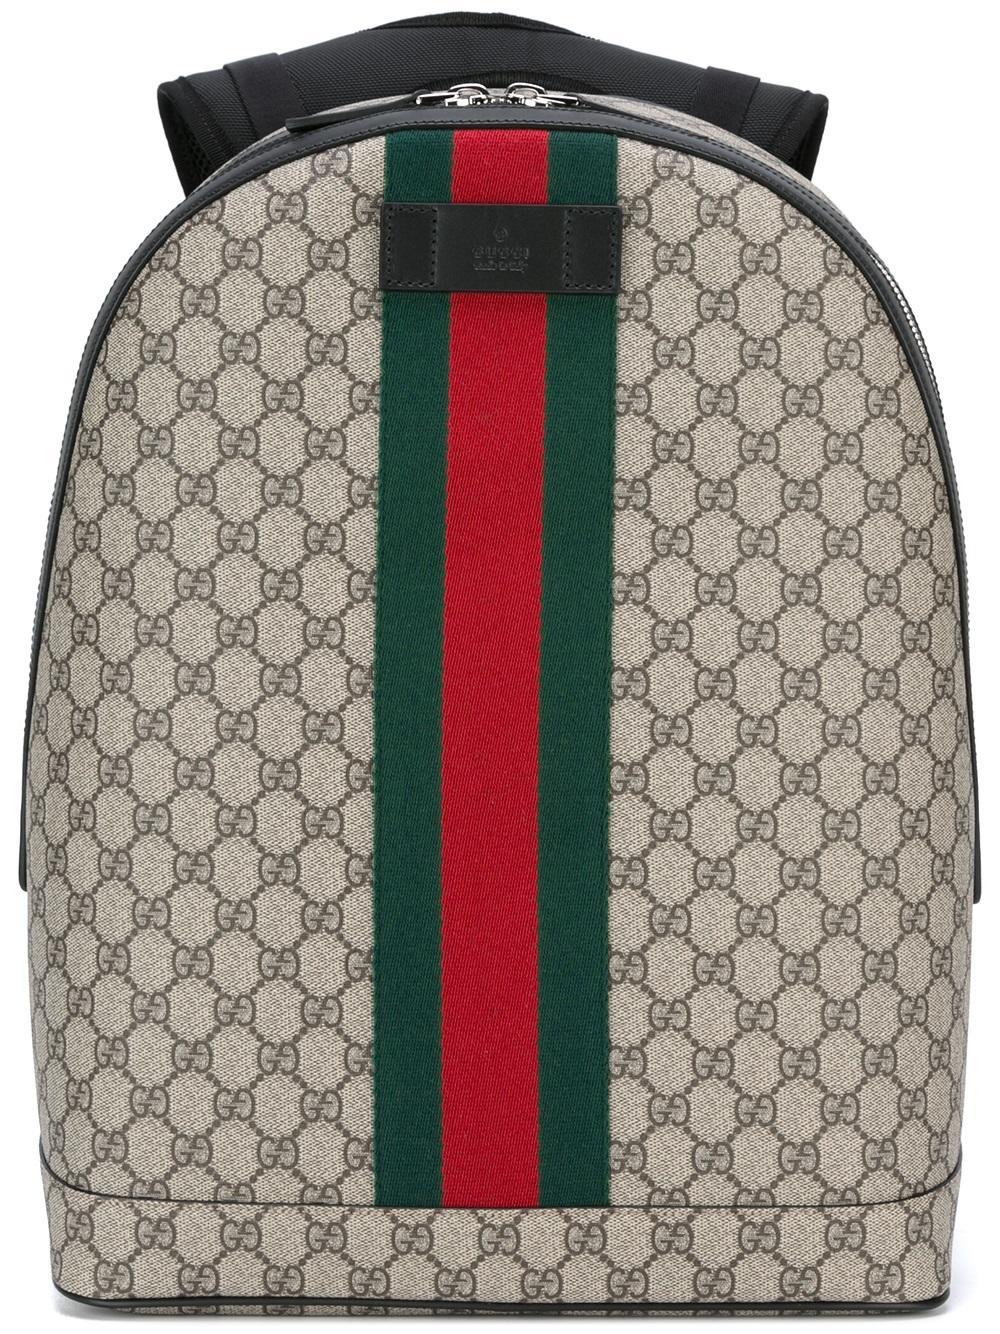 gucci backpack boys, OFF 70%,www 